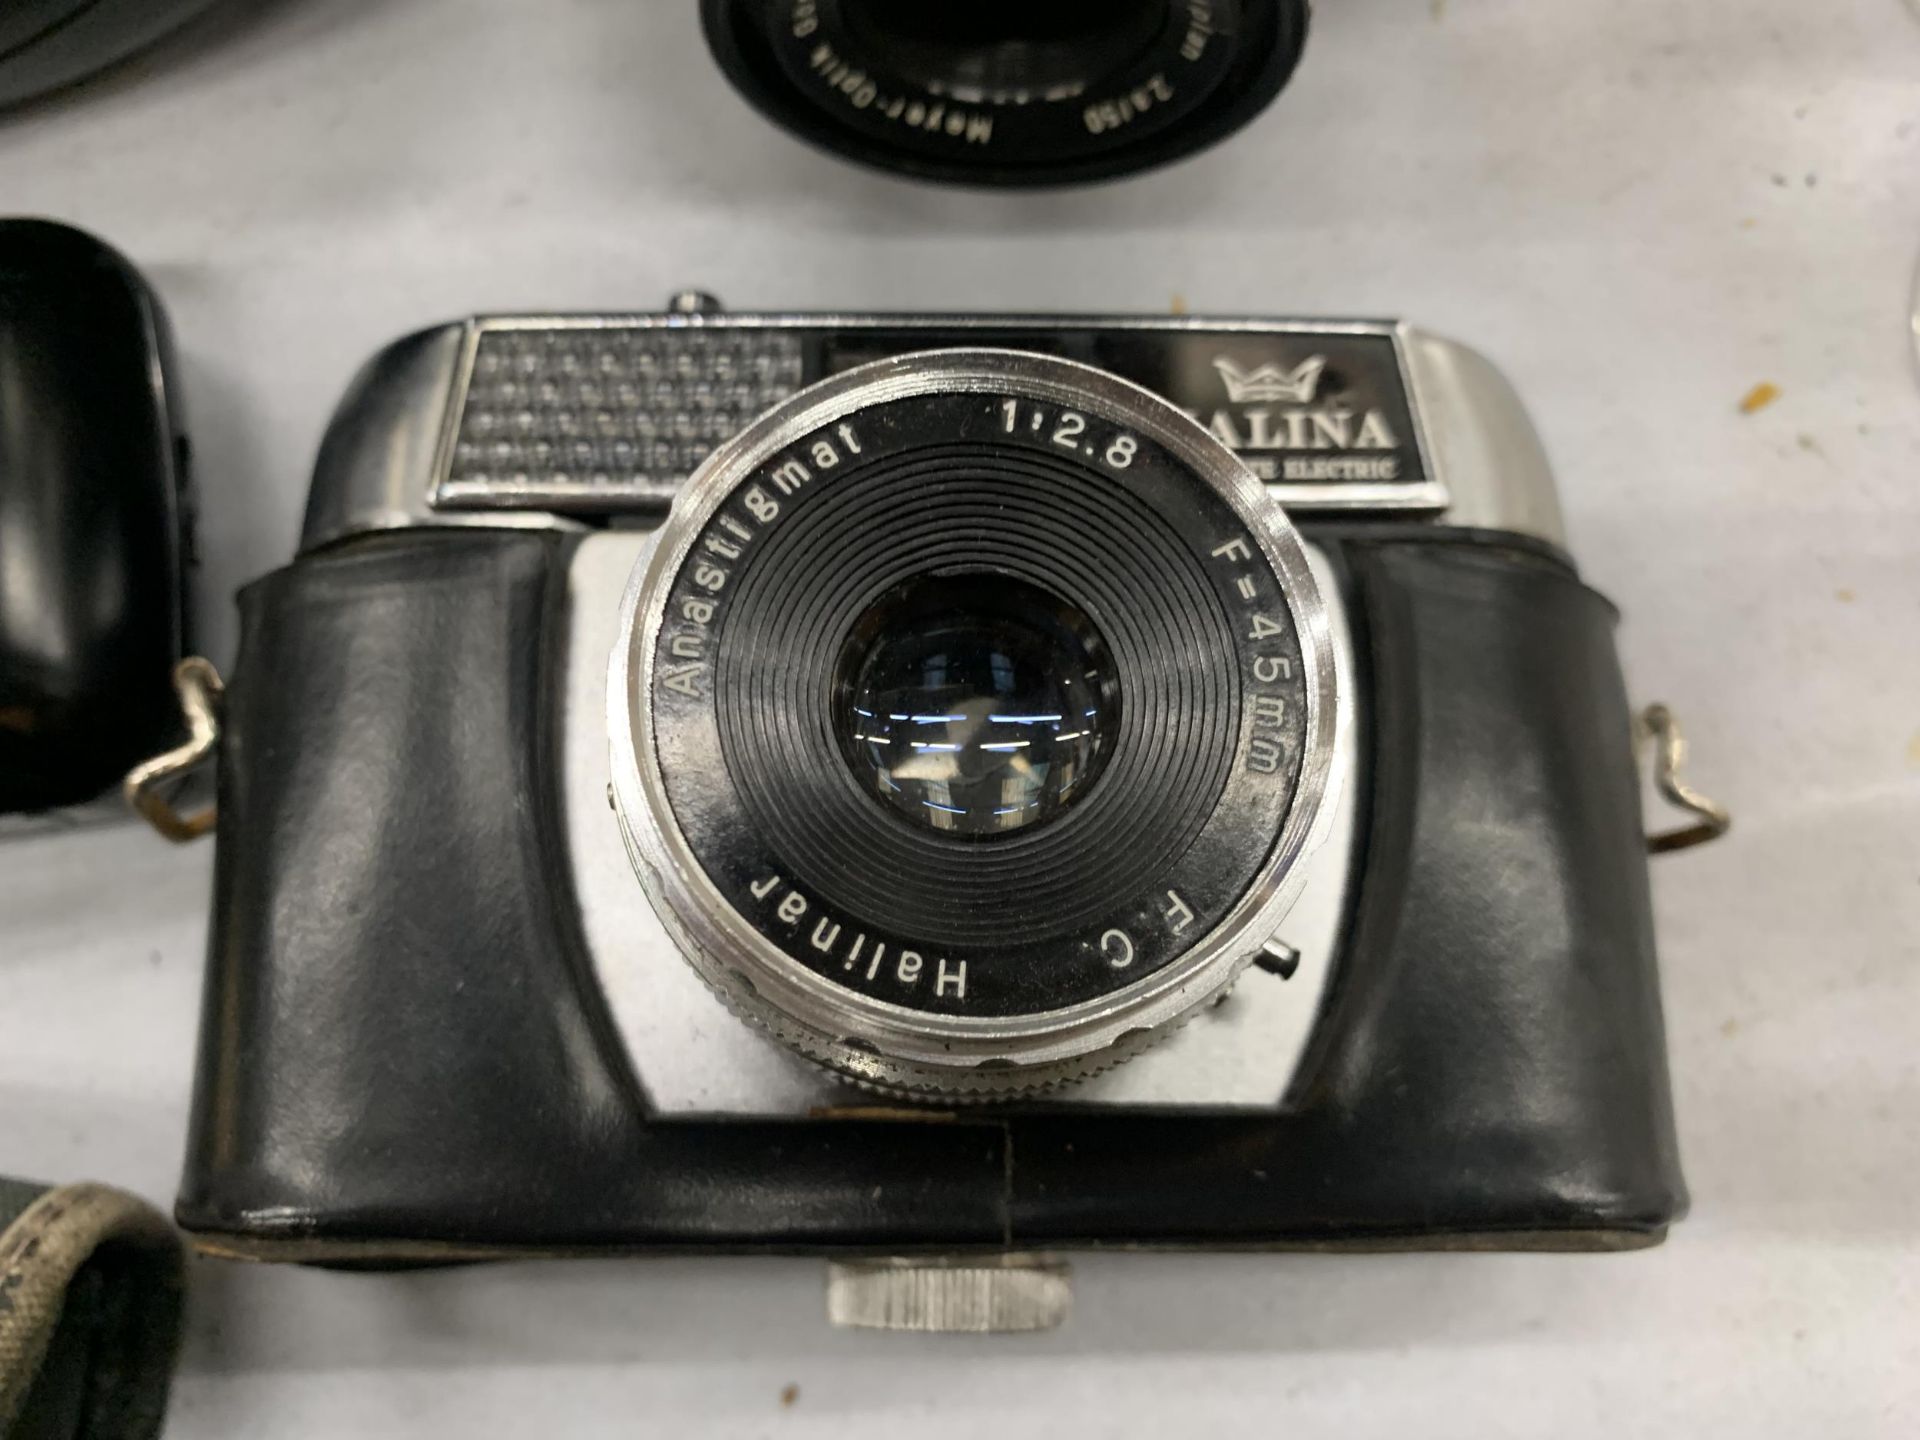 A VINTAGE HALINA 'PAULETTE' ELECTRIC CAMERA, A THAGEE DRESDEN EXA Ha, AN OLYMPUS, PLUS FOUR LENSES - Image 4 of 5